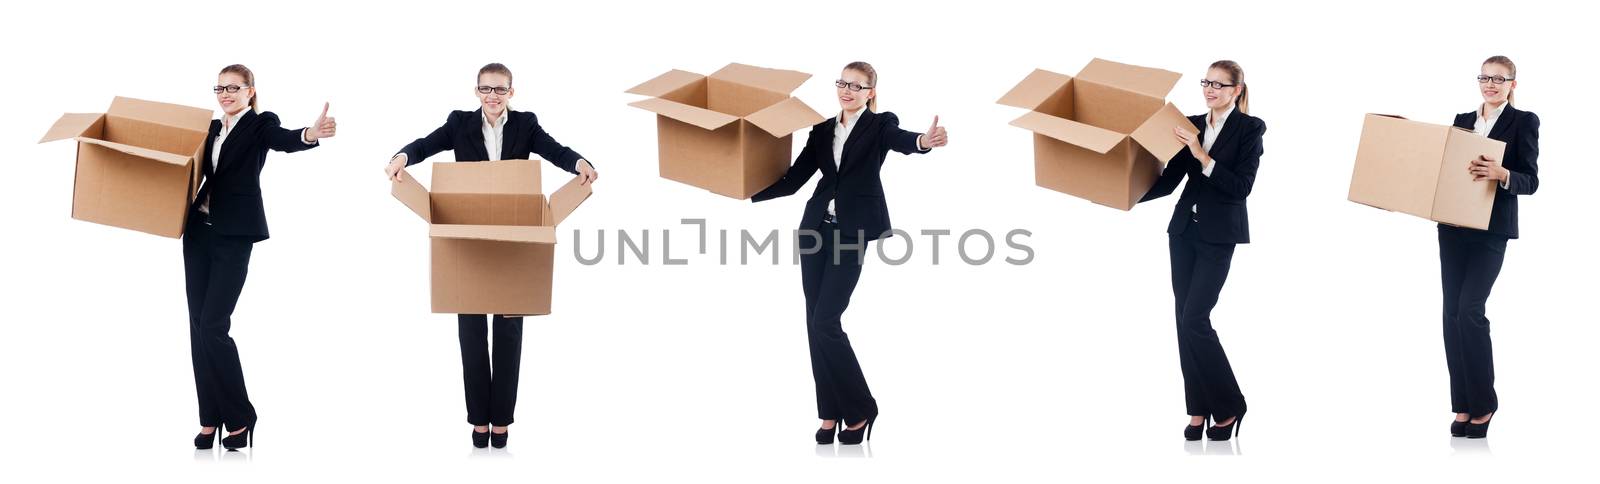 Woman businesswoman with boxes on white by Elnur